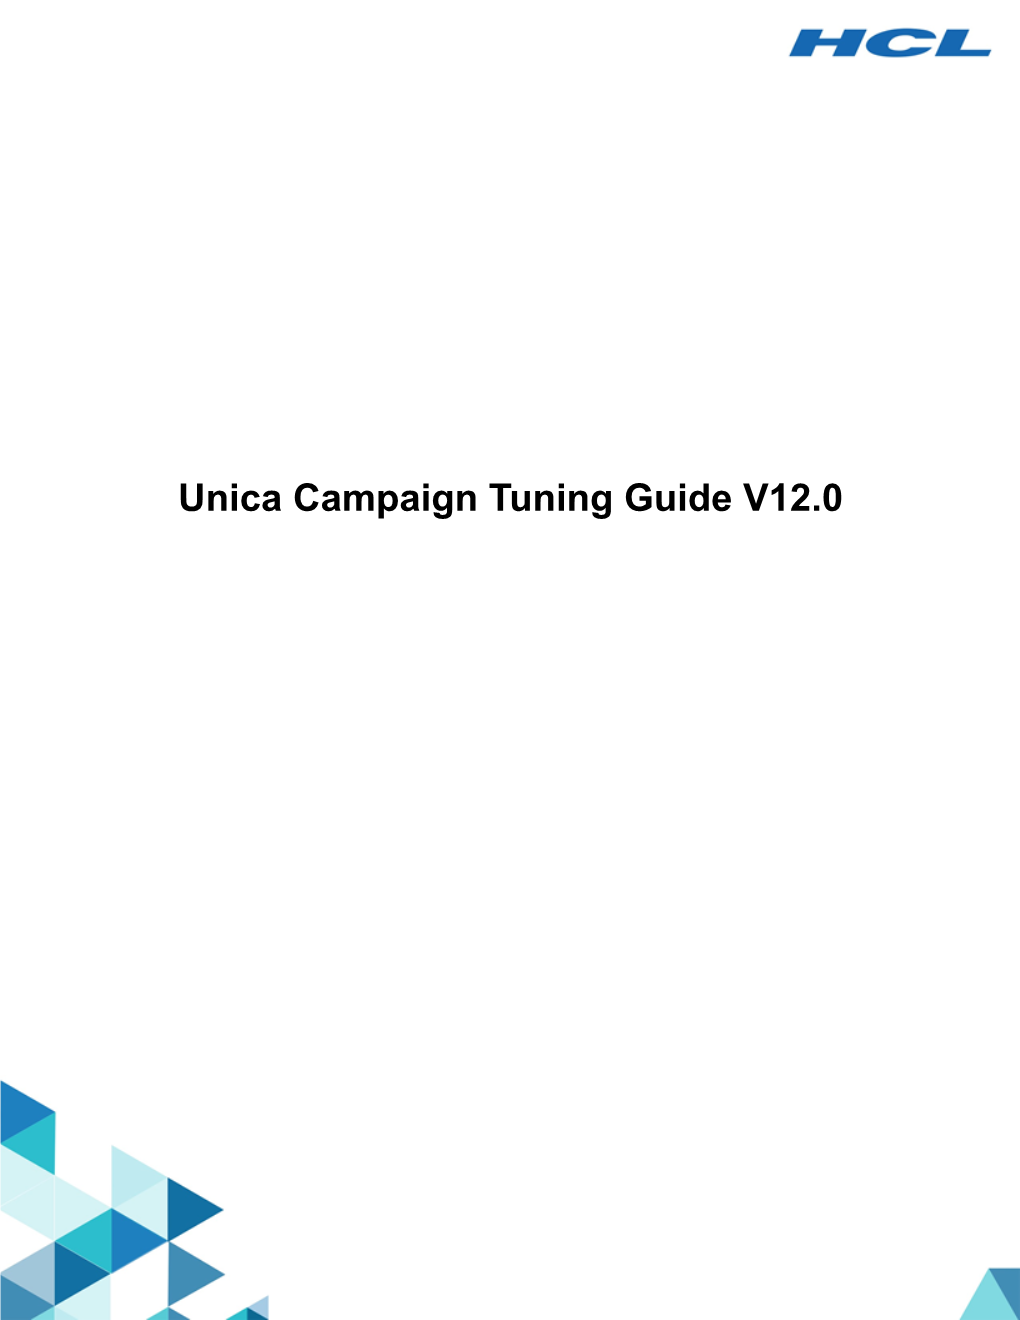 Unica Campaign Tuning Guide V12.0 Contents